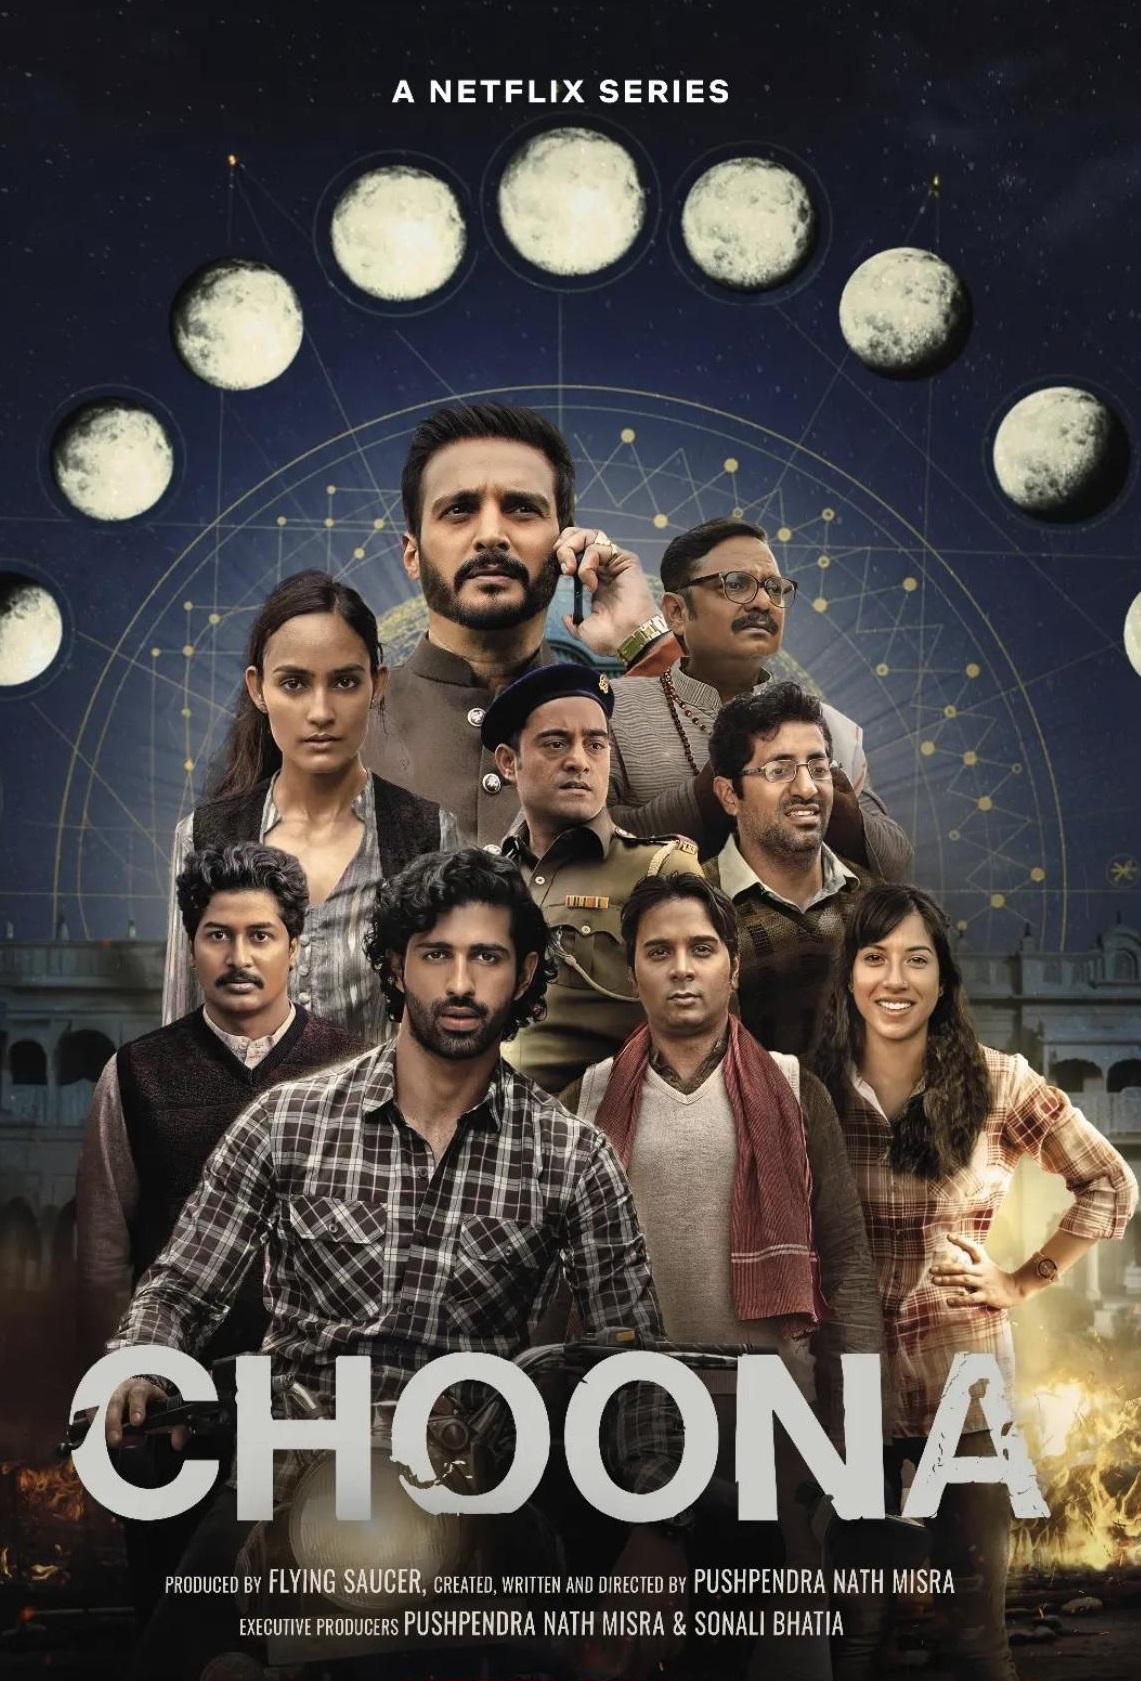 Choona- Netflix (September 28)After an unexpected delay, the much-anticipated dark comedy series 